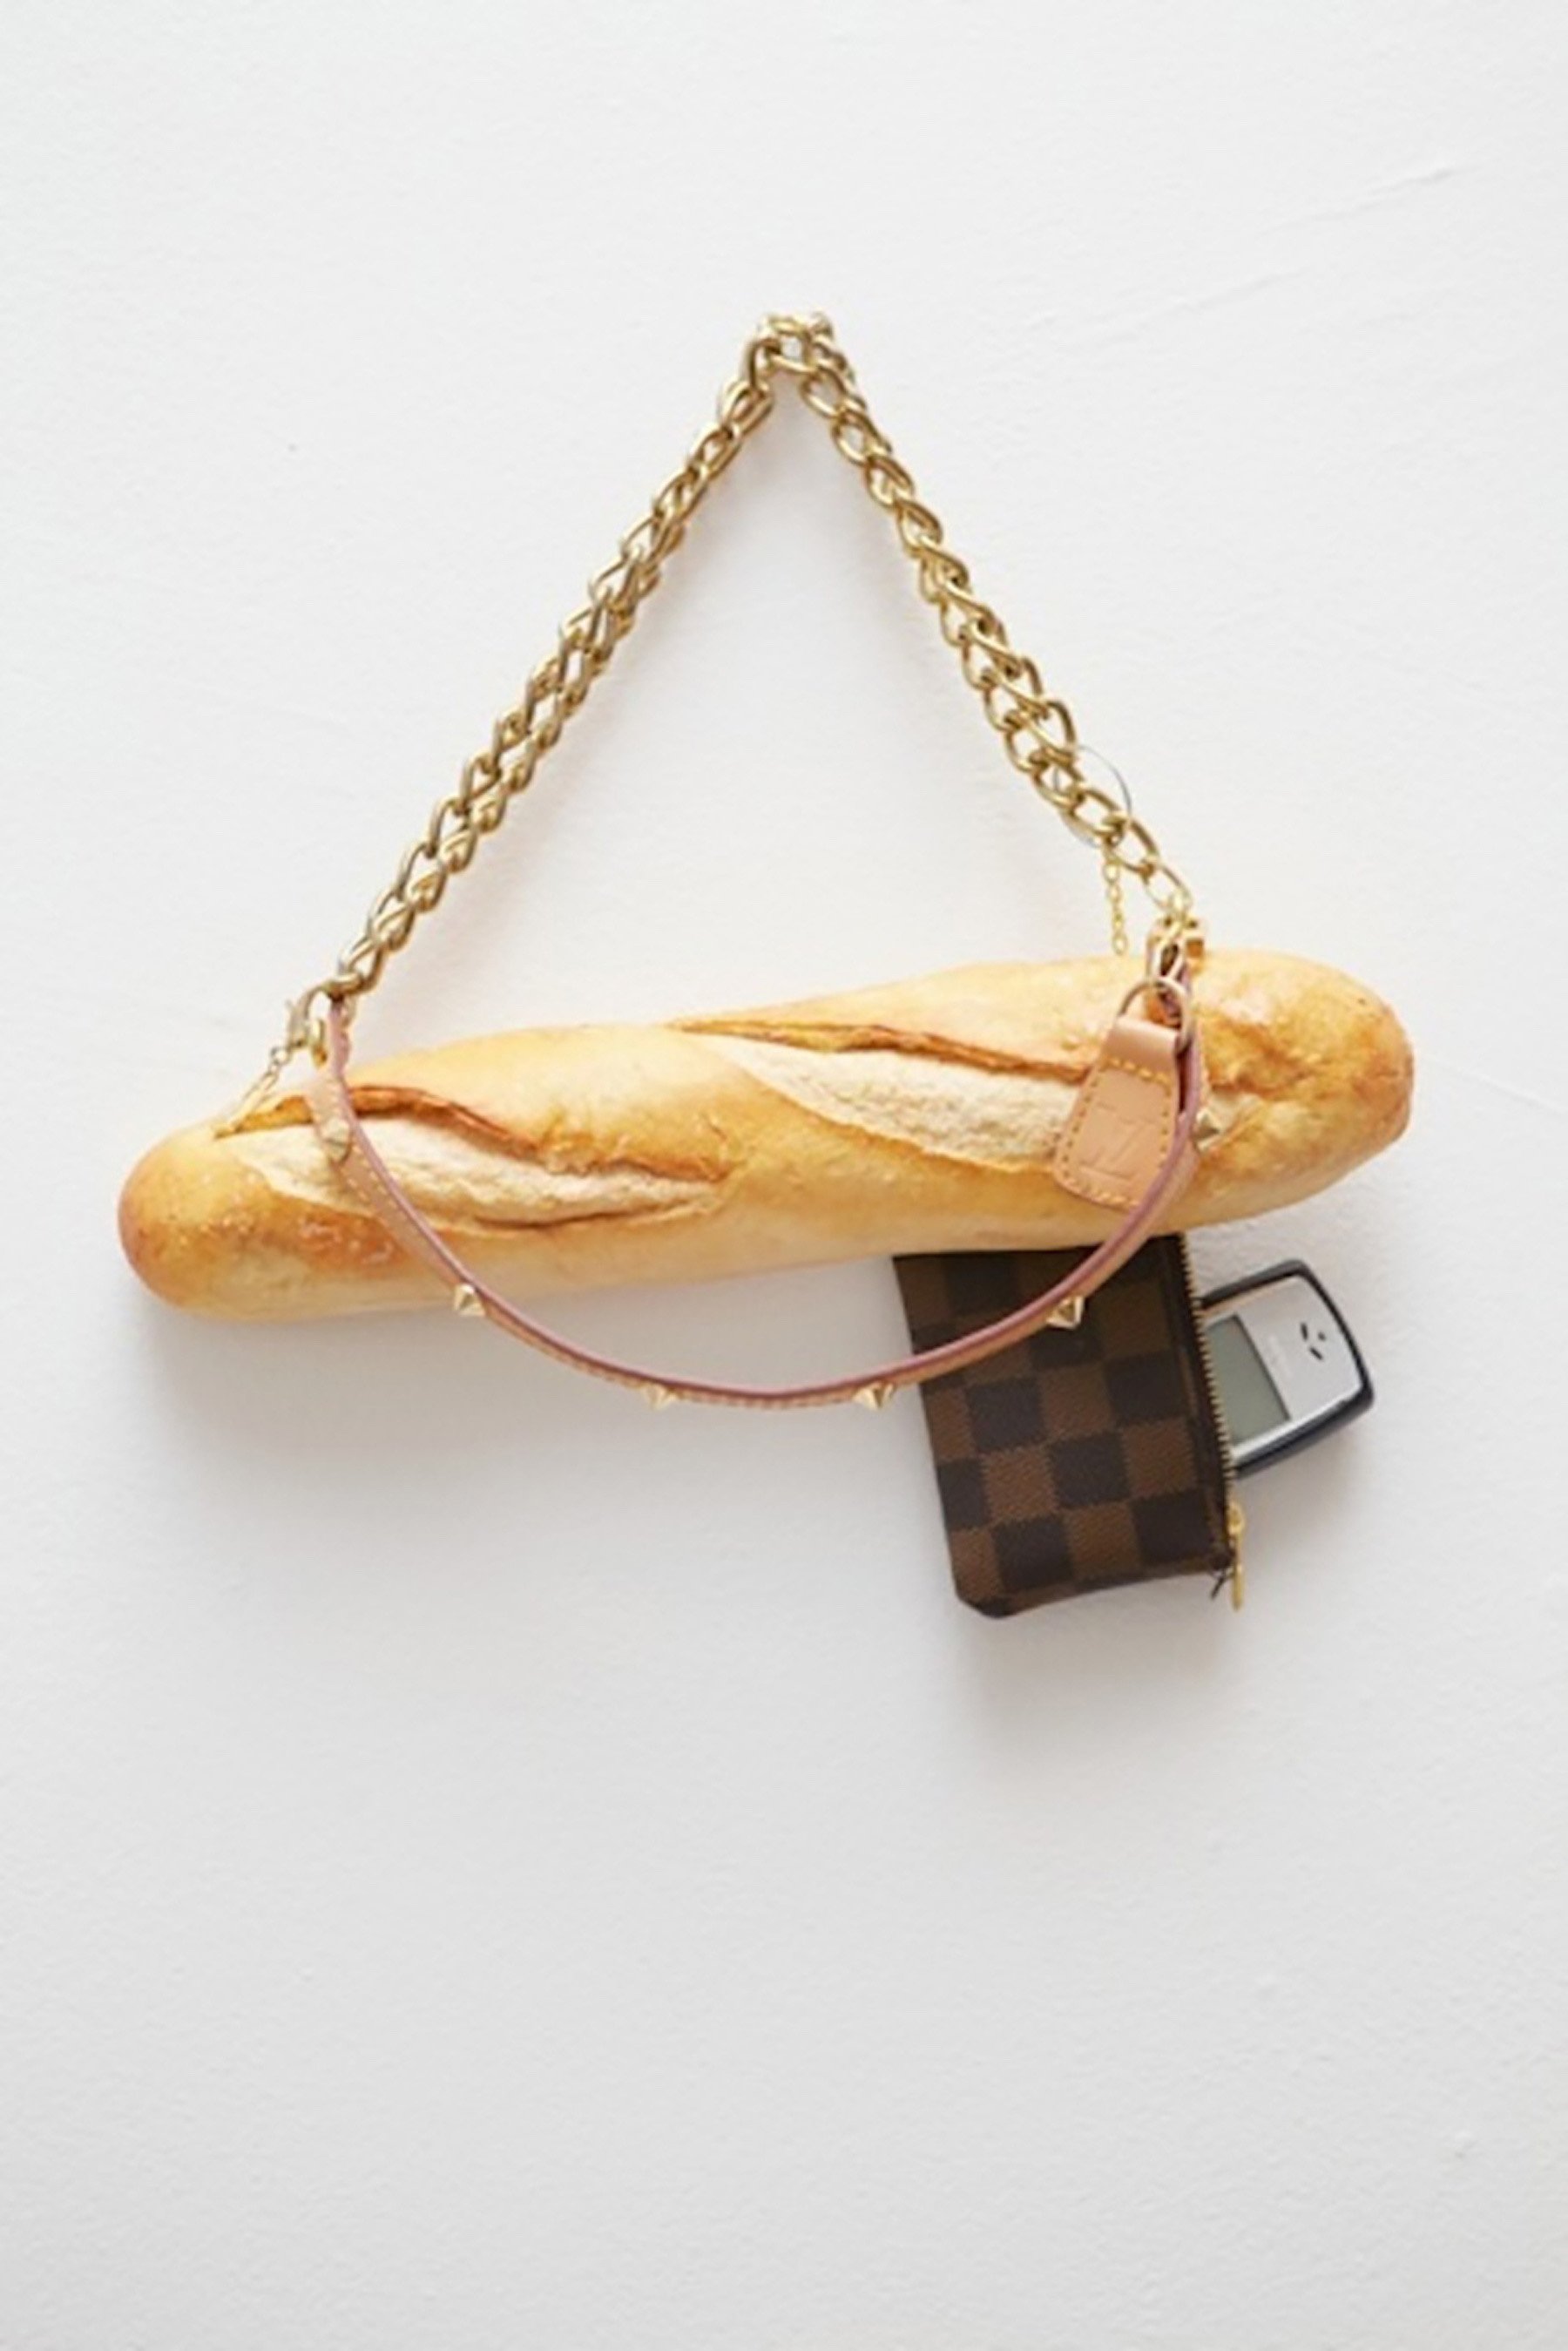 14 Things Every Woman Should Carry in Her Purse